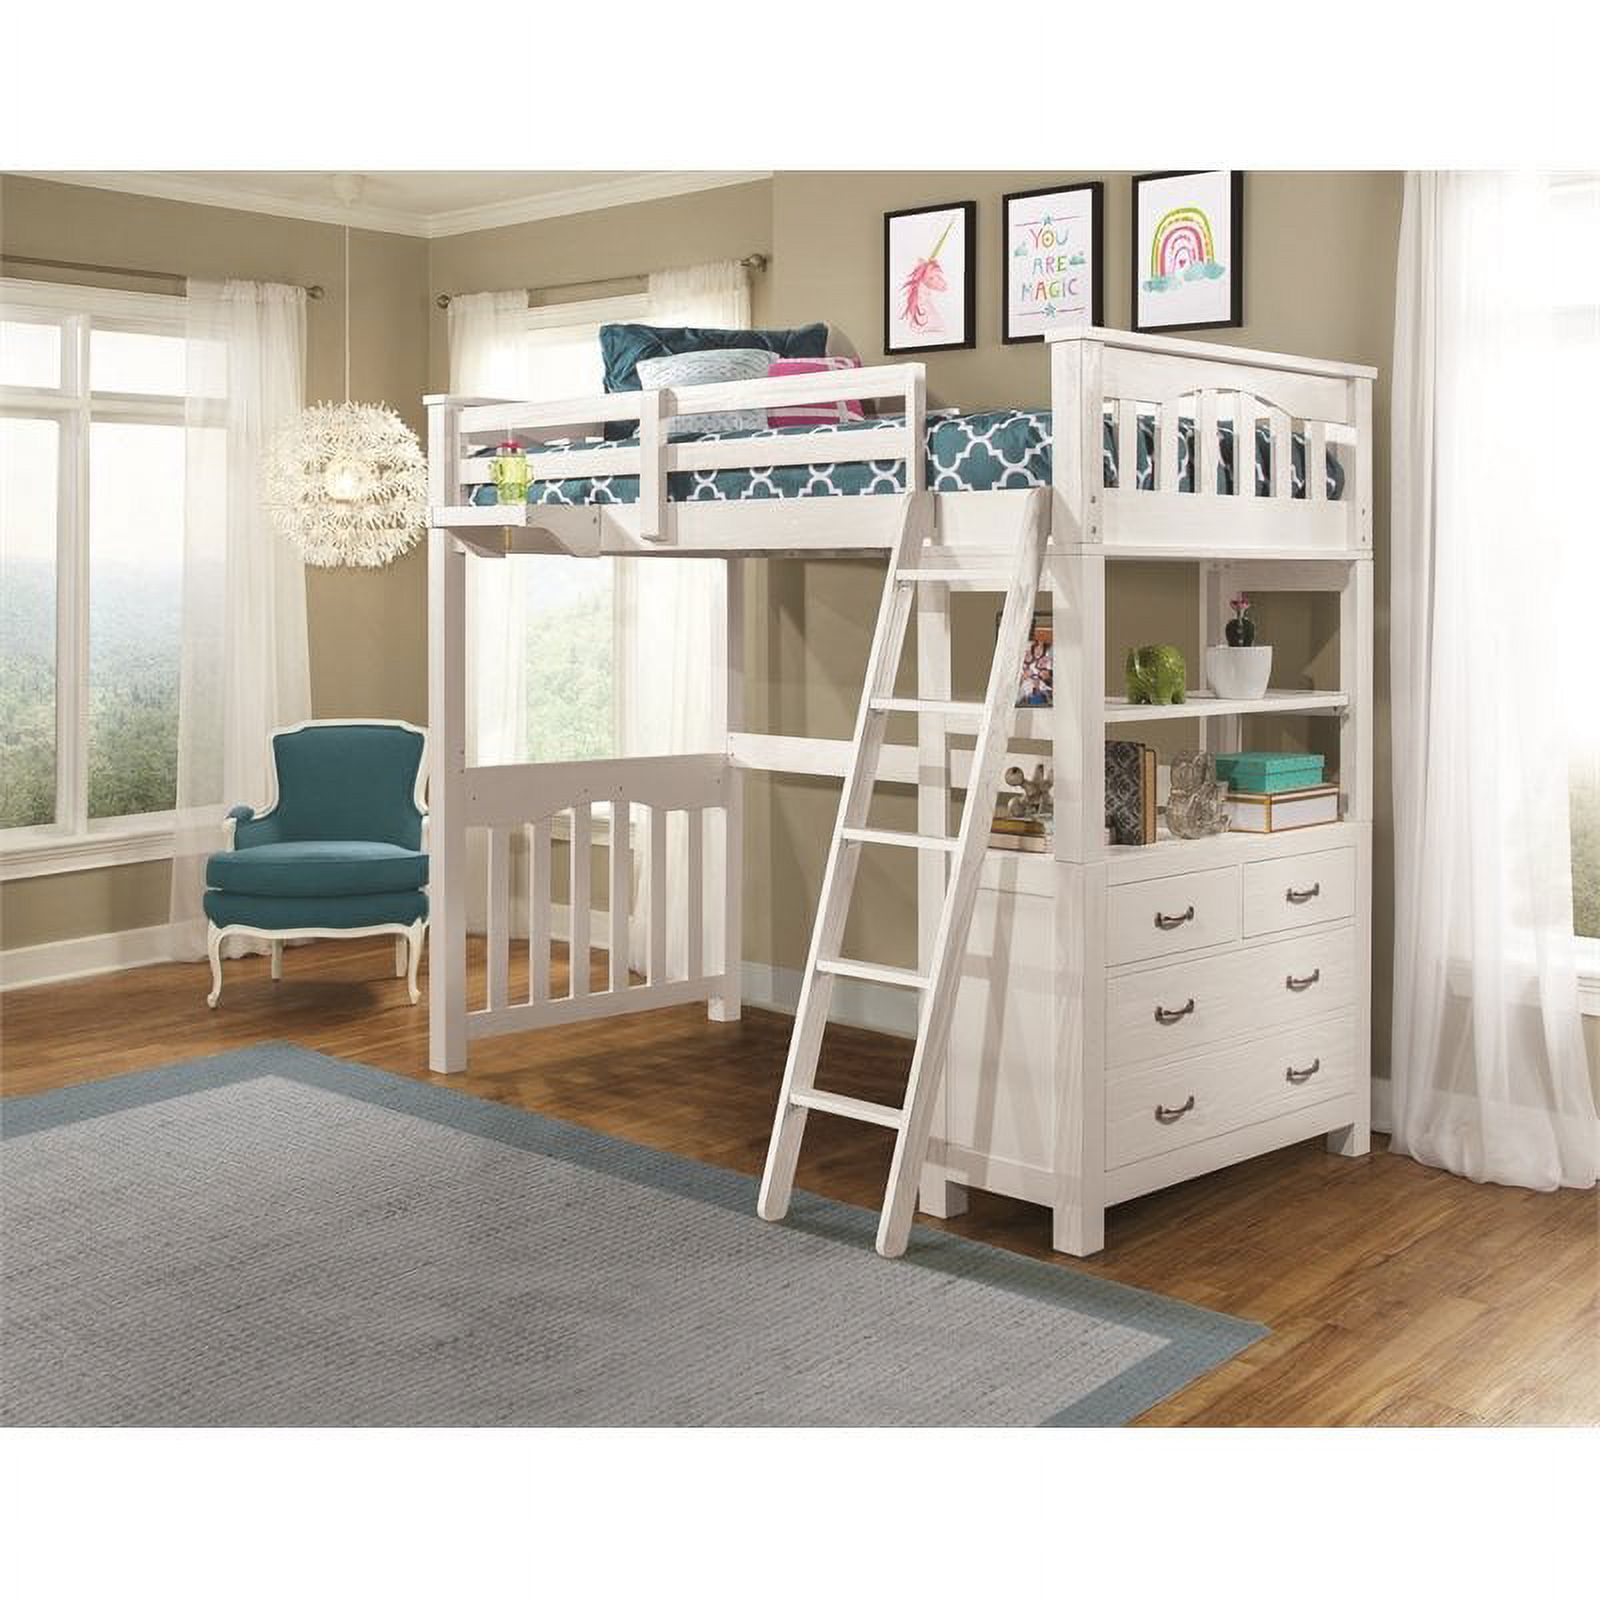 Highlands Twin Loft Bed with Hanging Nightstand in White - image 2 of 8